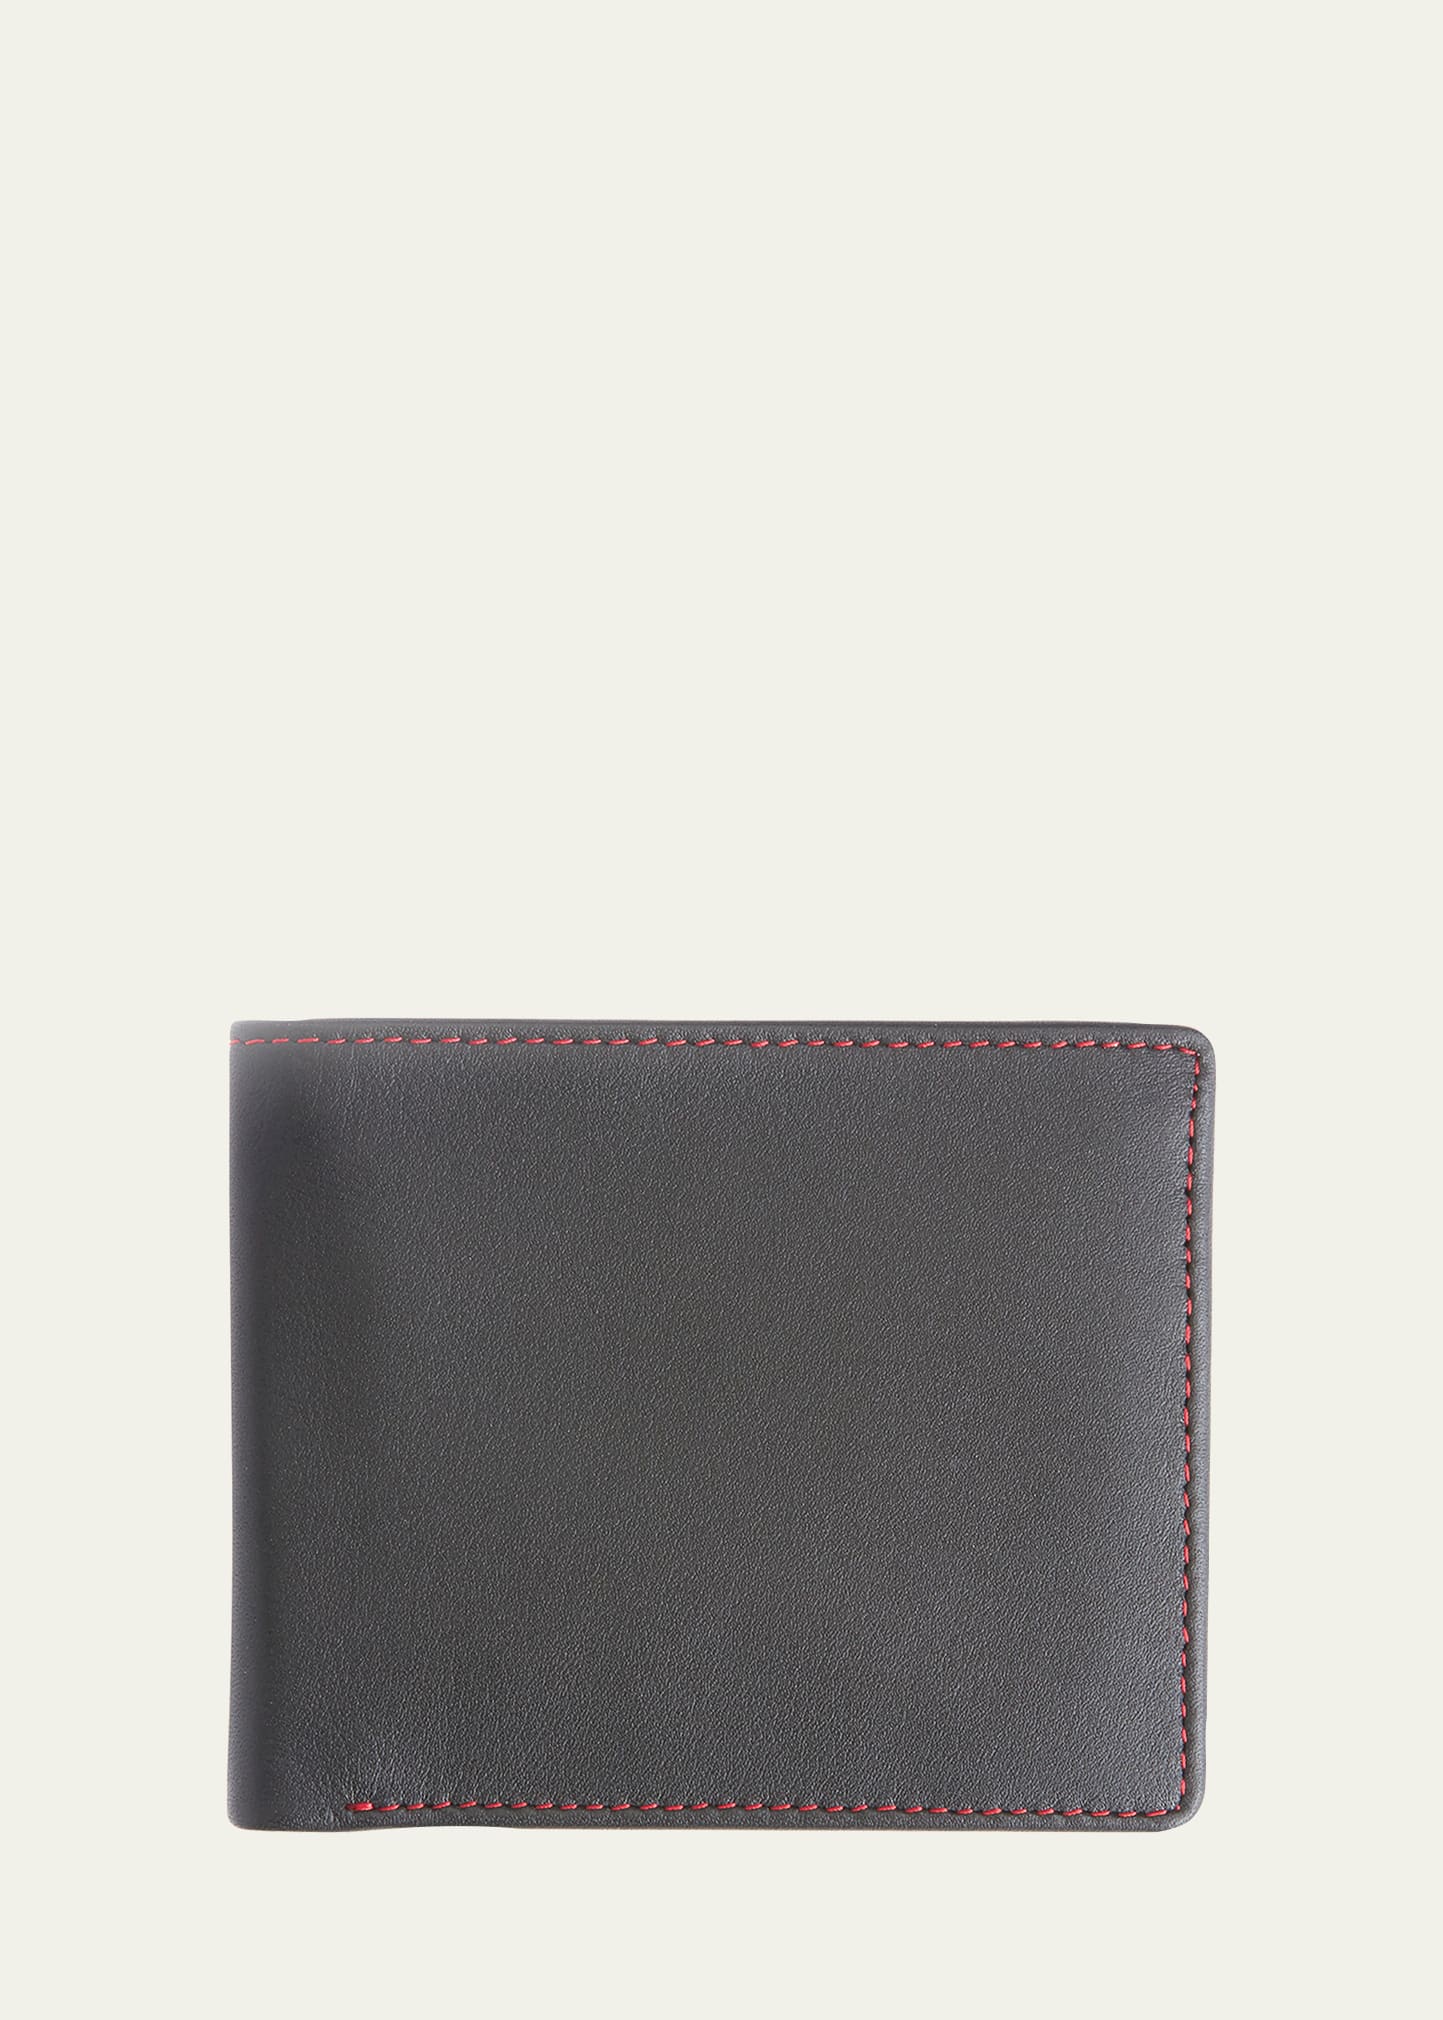 Royce New York Personalized Leather Rfid-blocking Trifold Wallet In Black